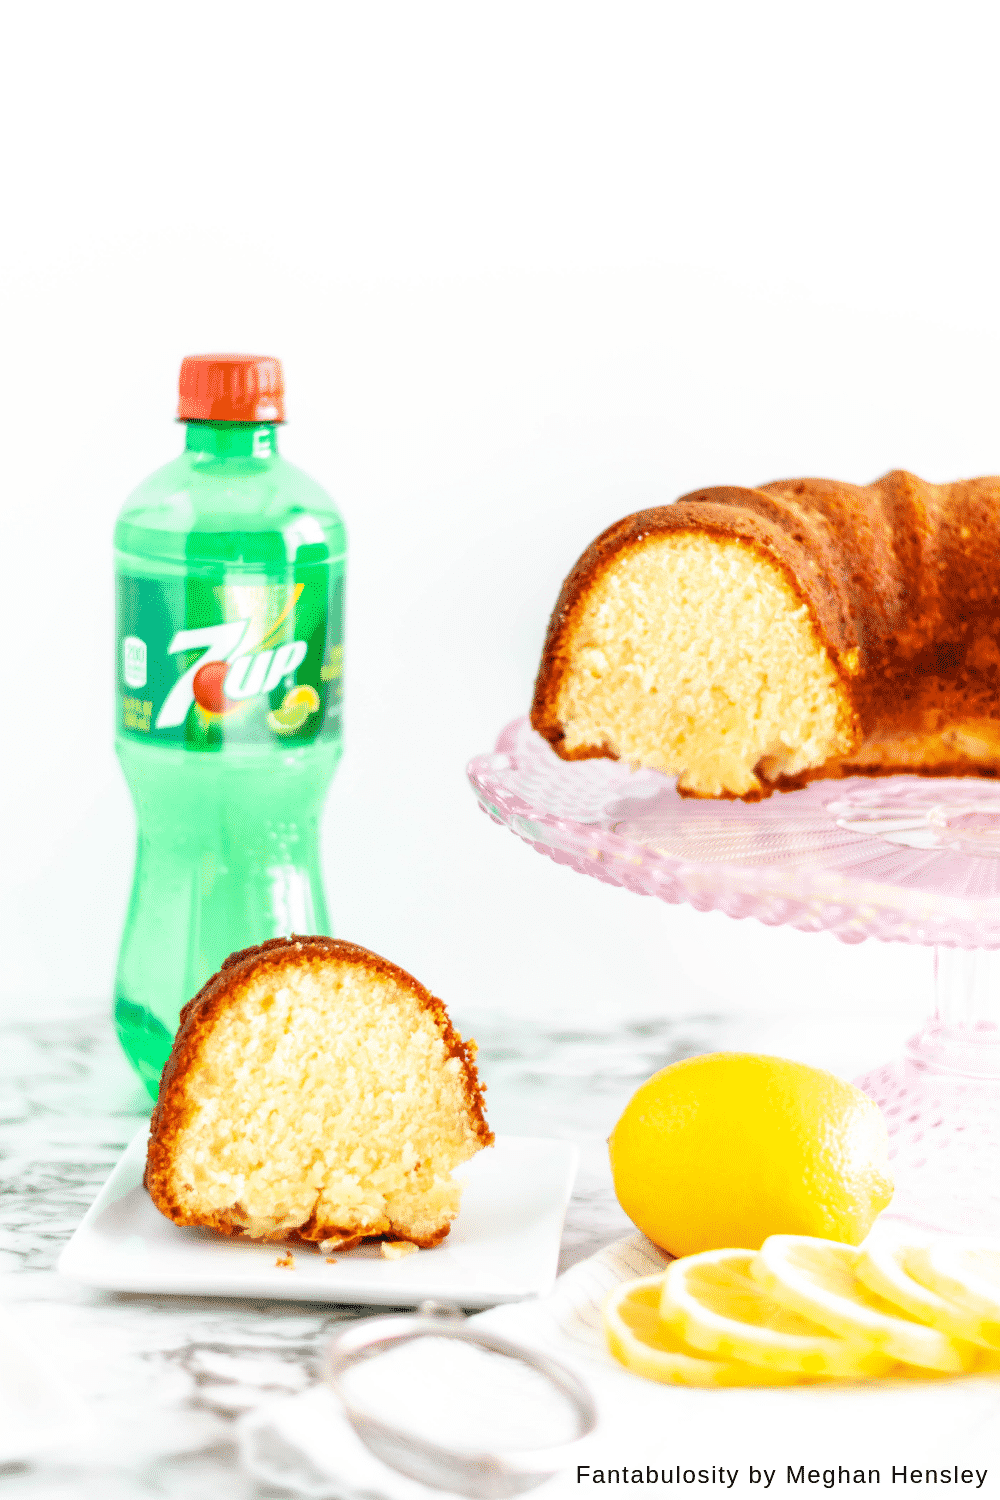 You only need 6 ingredients to whip up this 7UP Pound Cake. Dense in texture and light and bright in flavor, this cake will become your new favorite spring dessert.